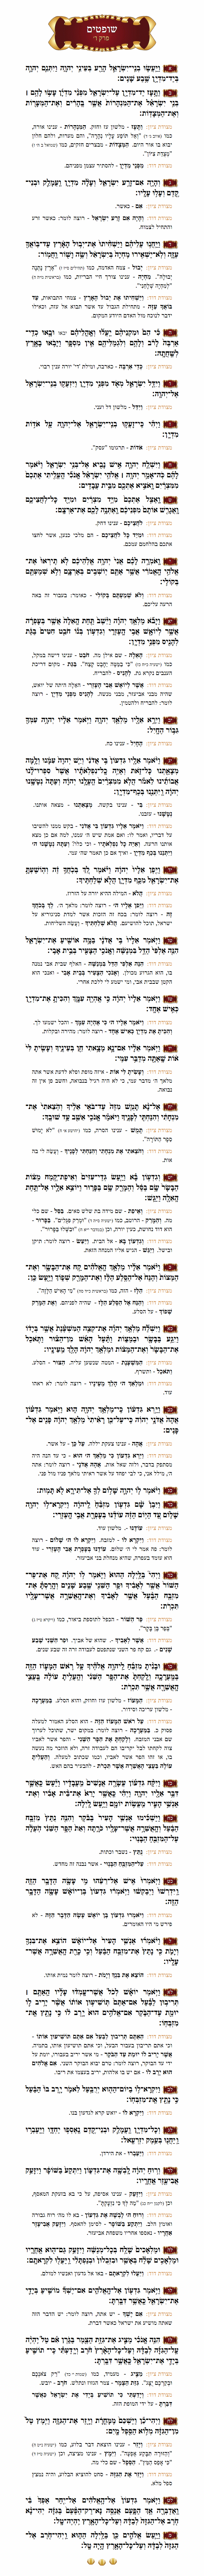 Sefer Shoftim Chapter 6 with commentary